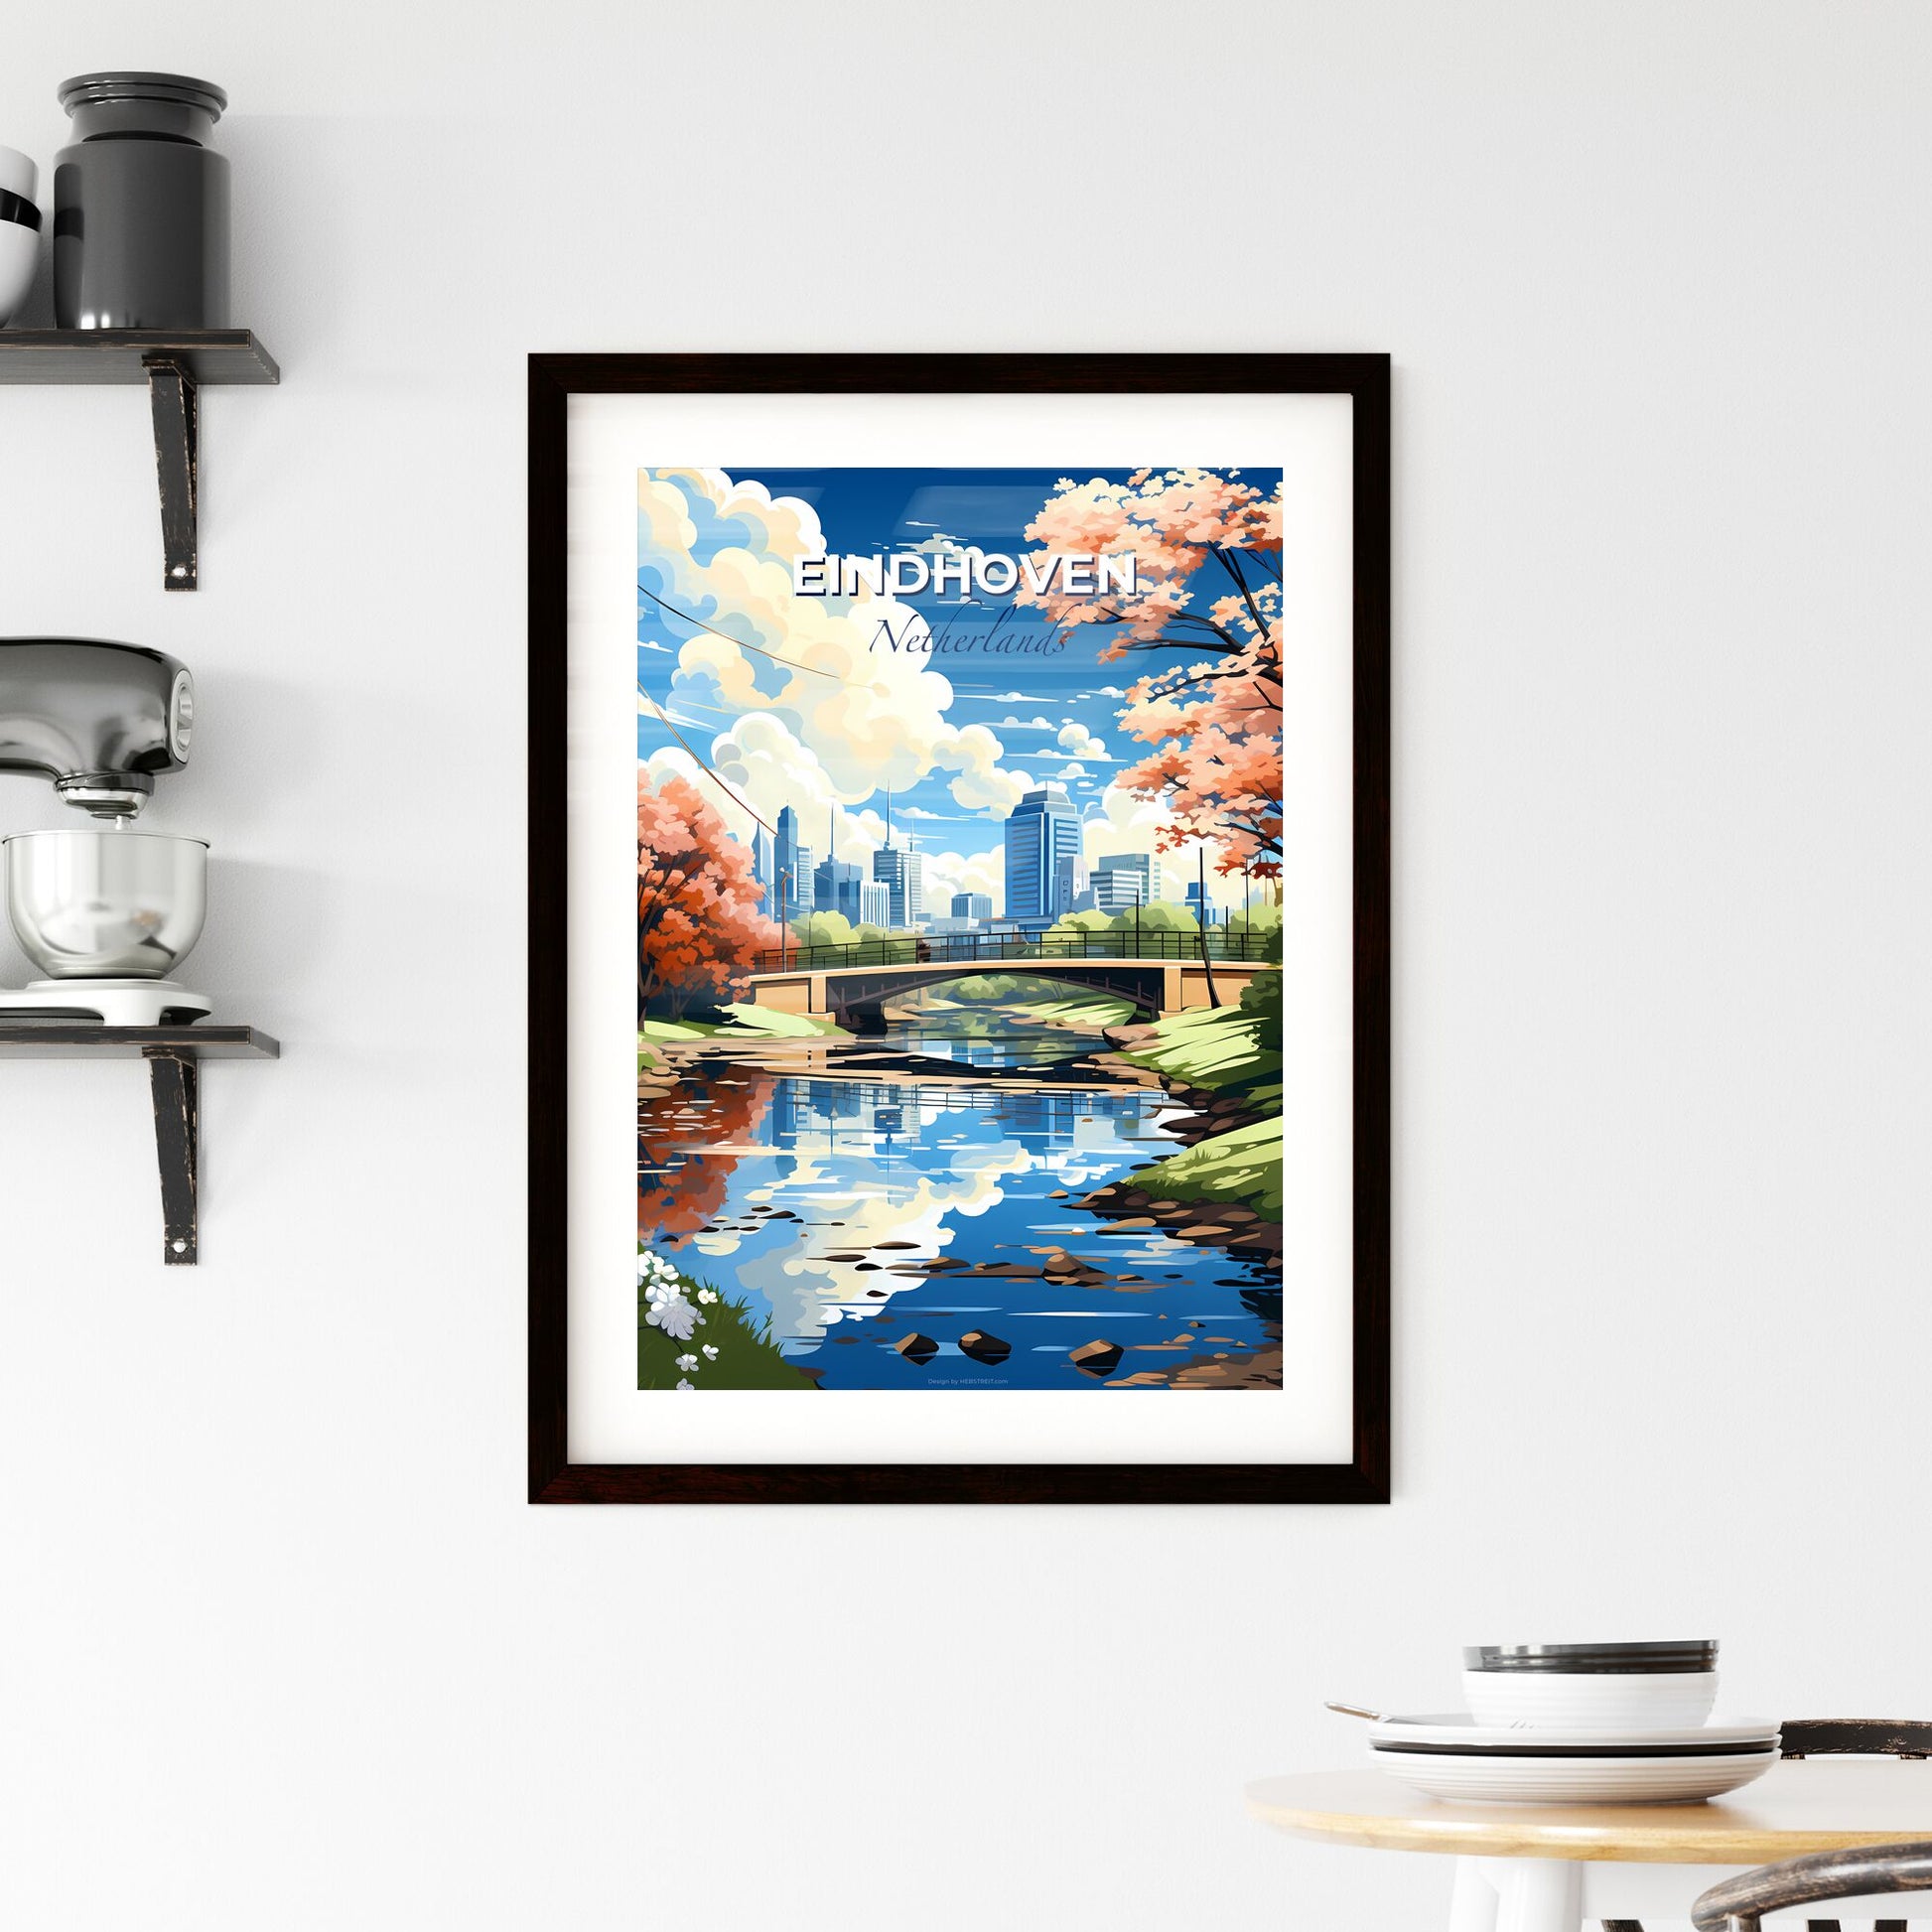 Eindhoven, Netherlands, A Poster of a bridge over a river with trees and a city in the background Default Title